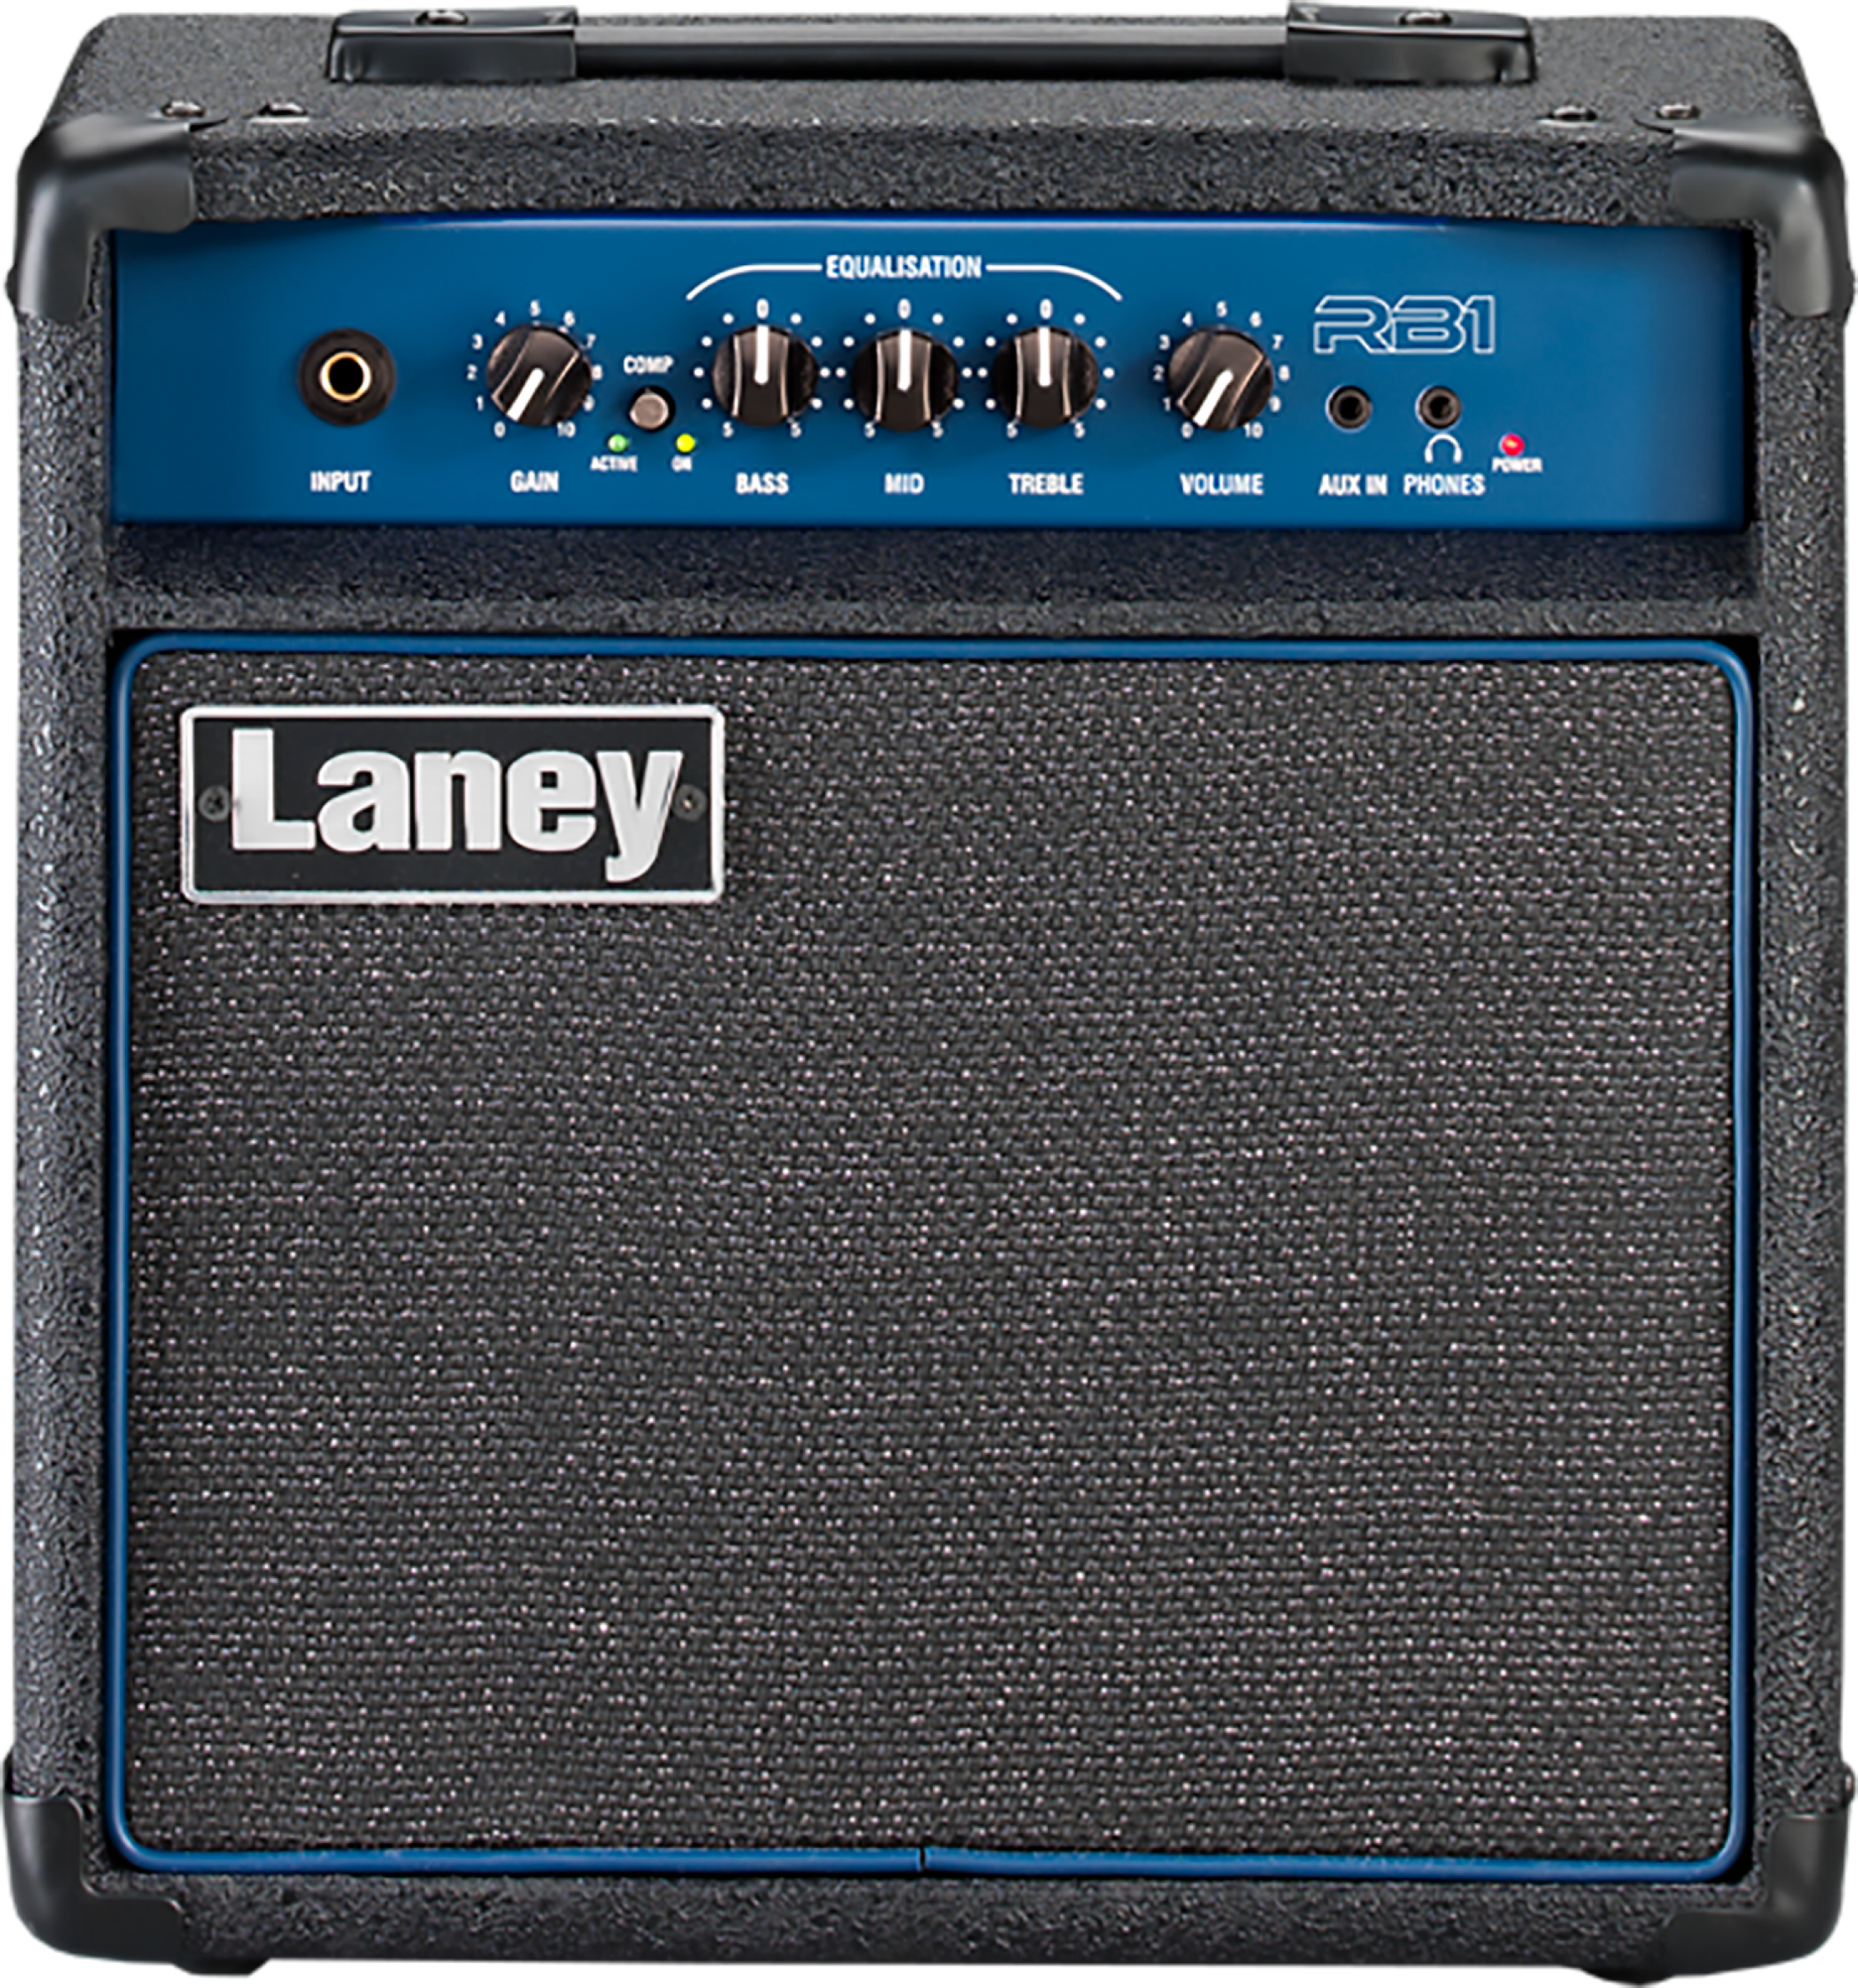 Laney Richter Rb1 15w 1x8 Black - Bass combo amp - Main picture